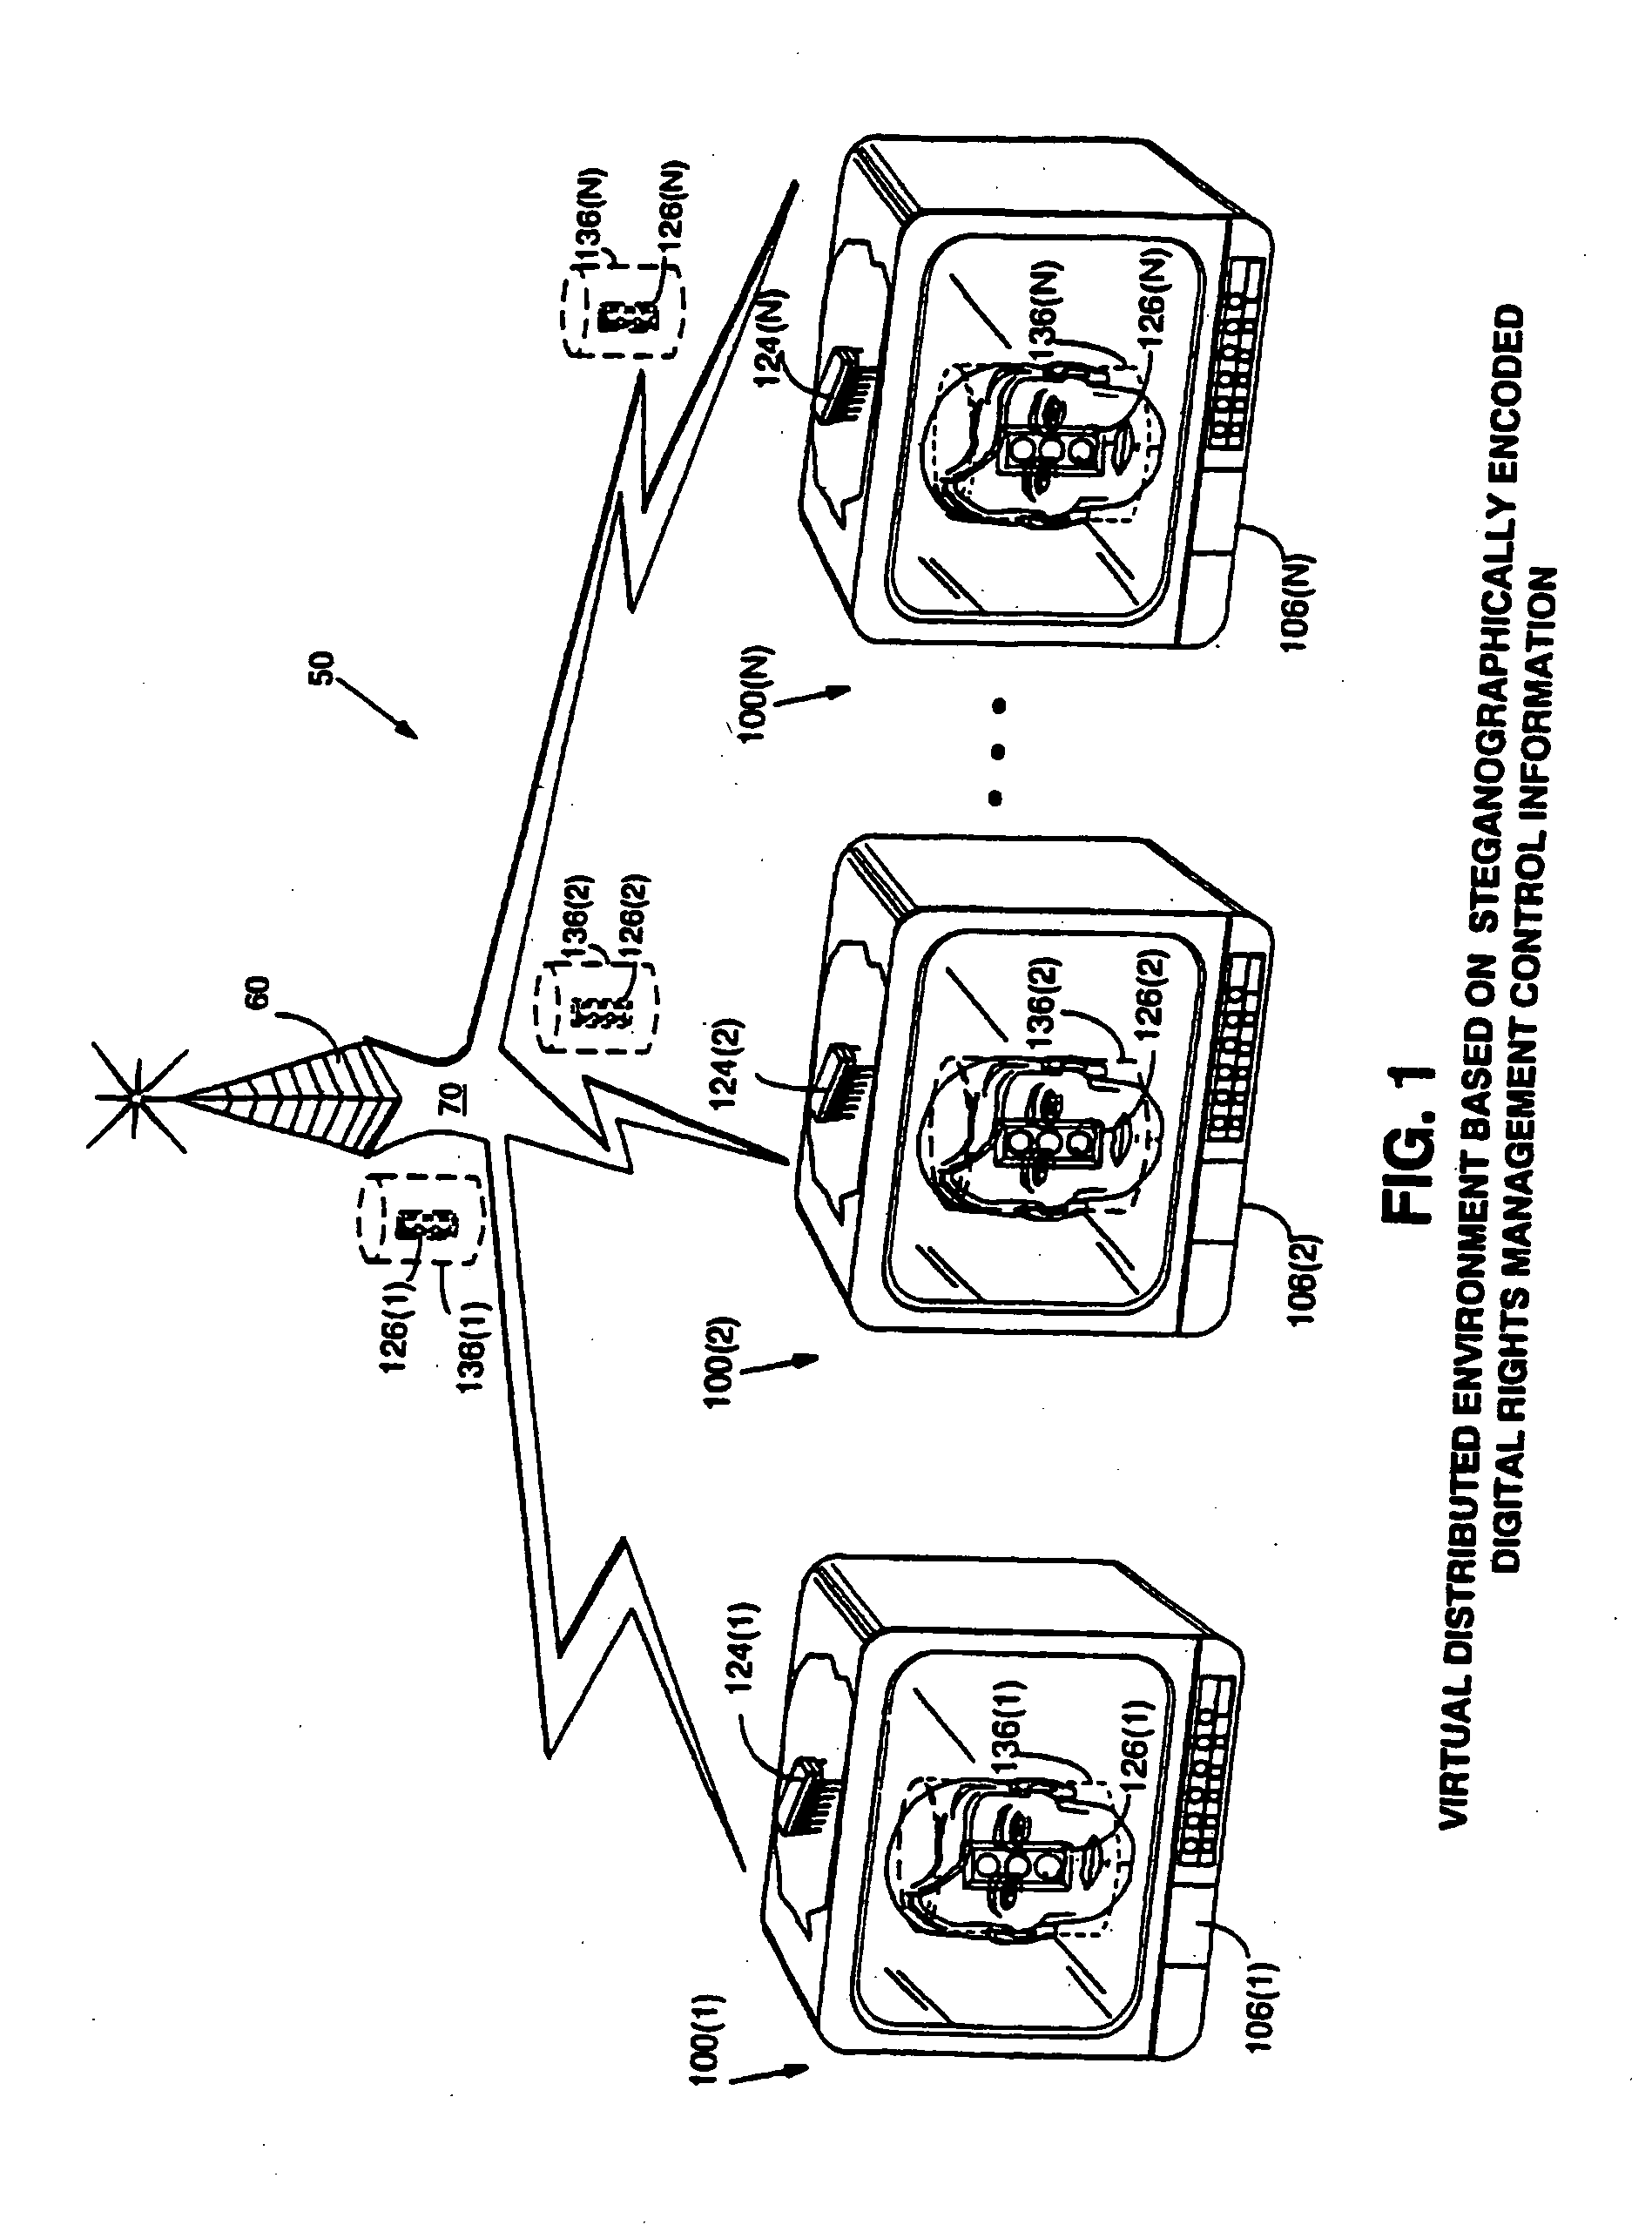 Steganographic techniques for securely delivering electronic digital rights management control information over insecure communication channels